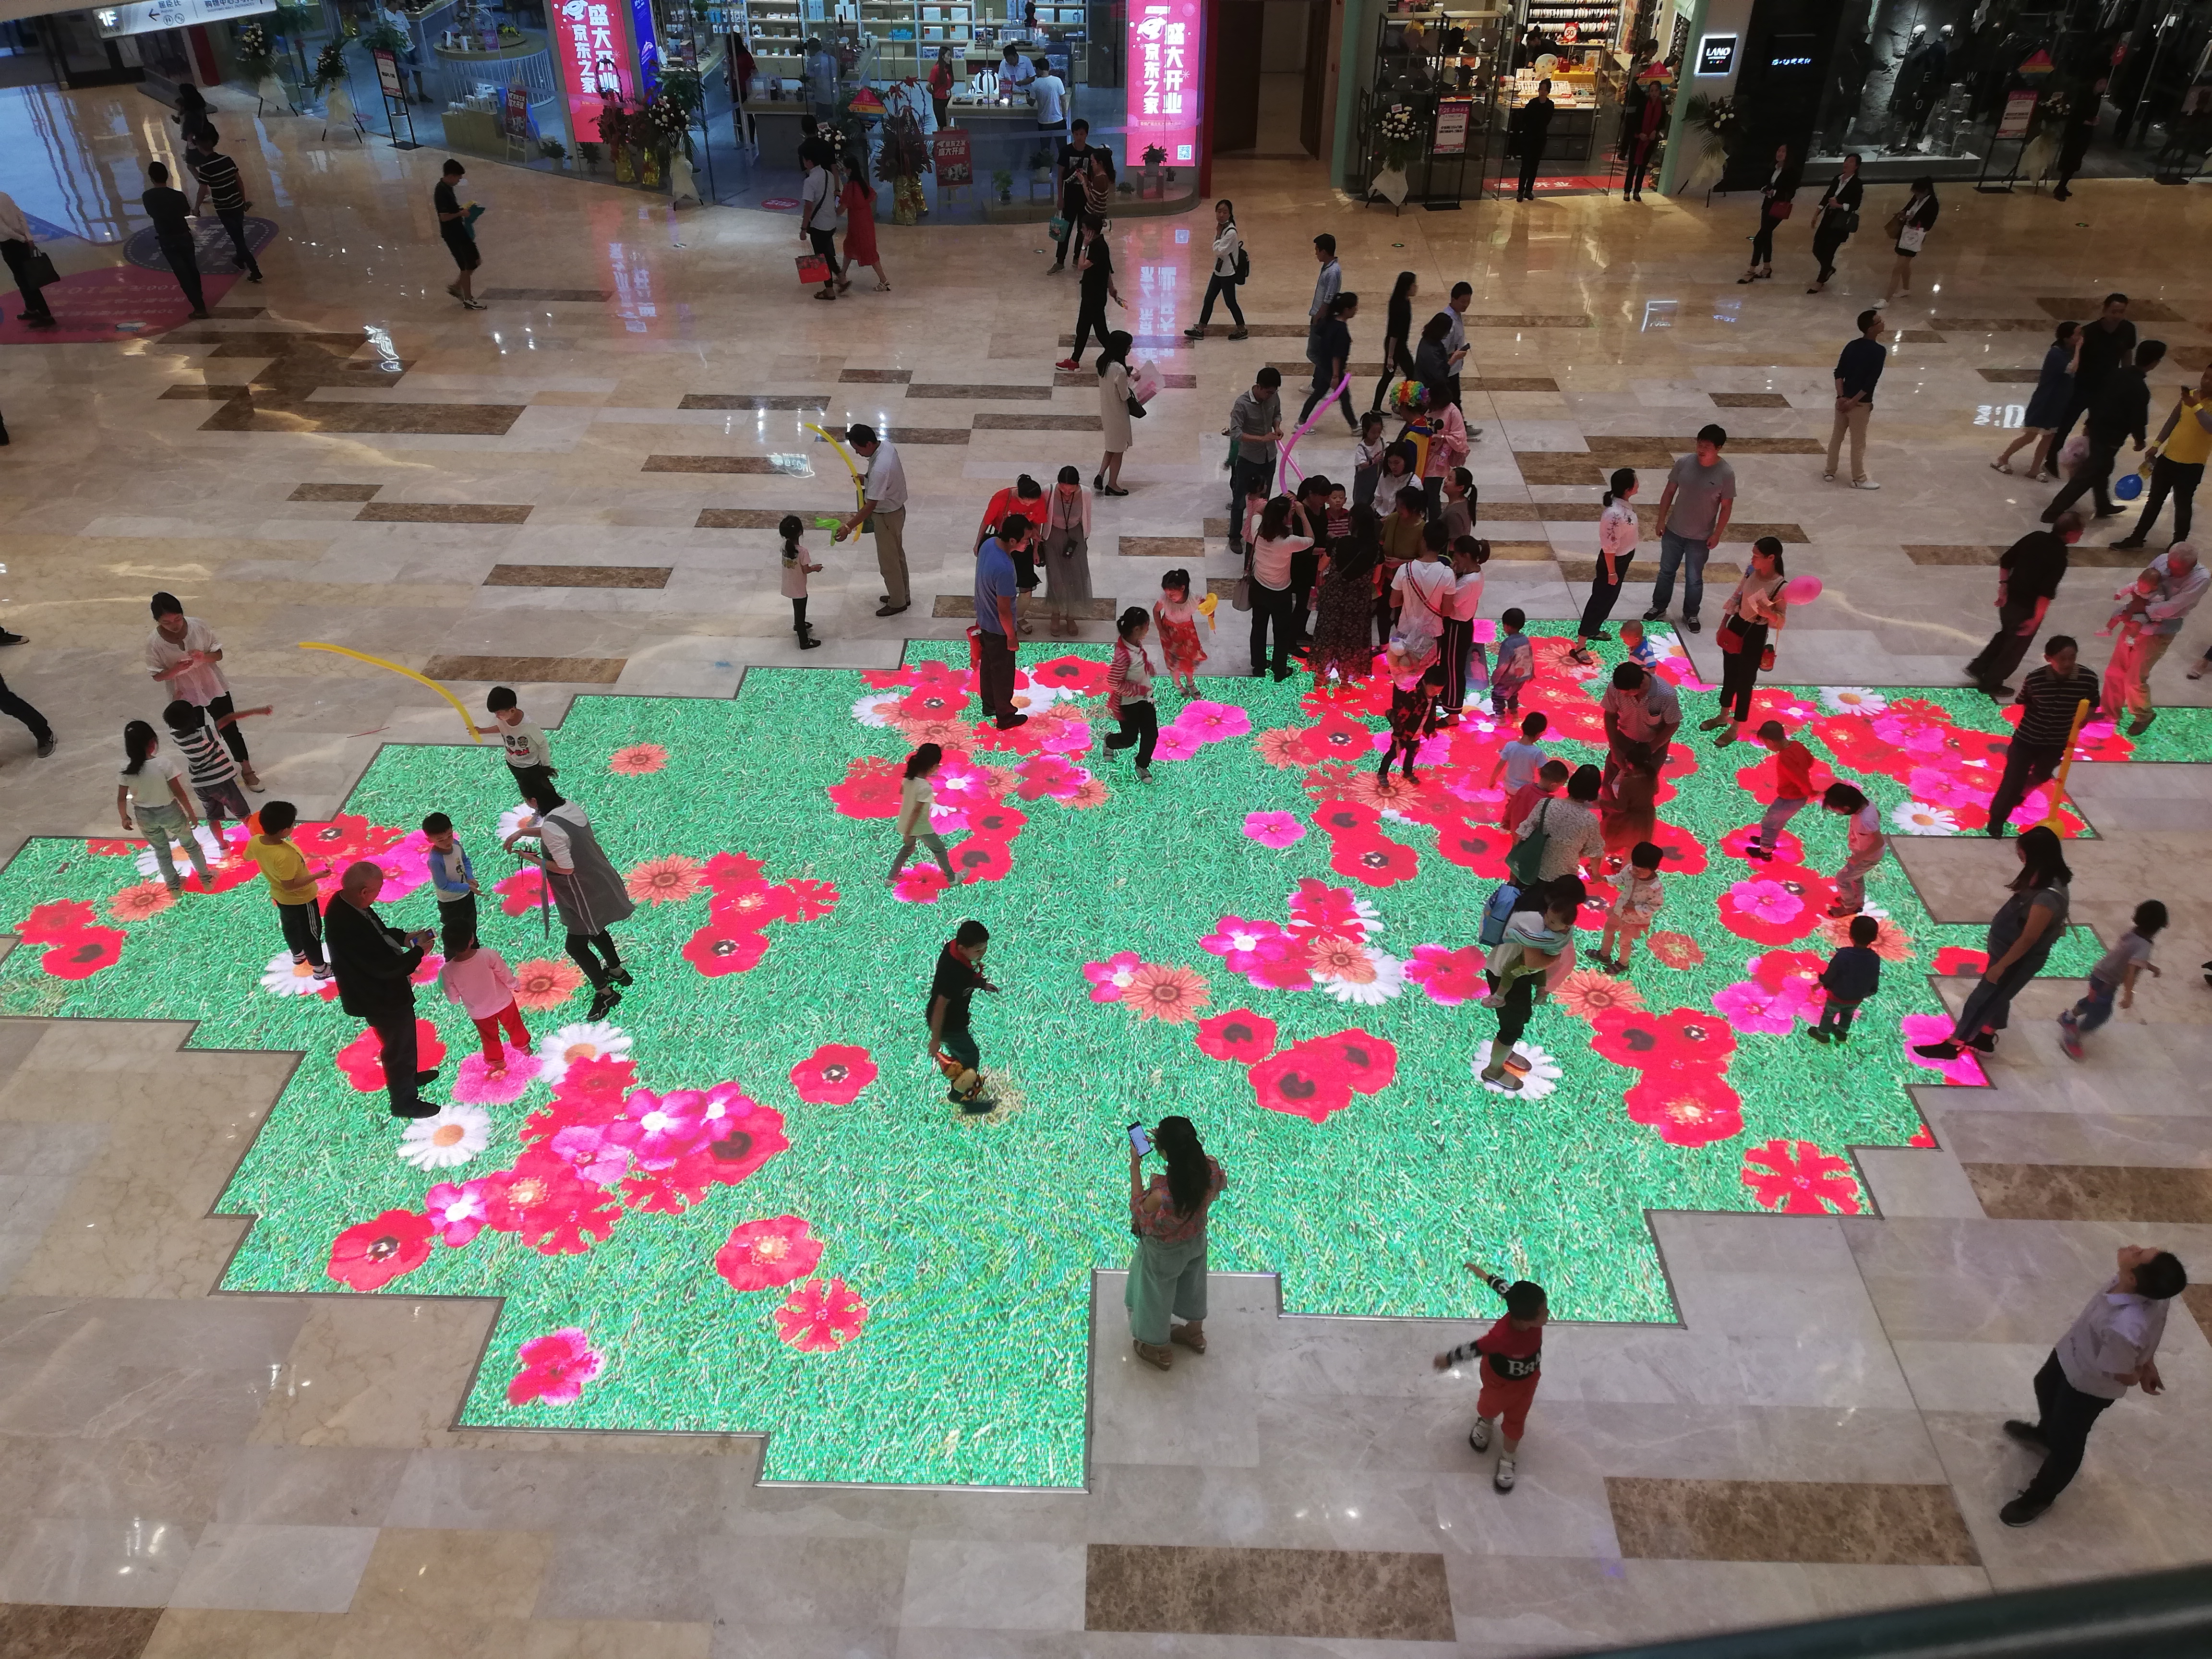 Where is the interactive LED floor screen suitable for use?